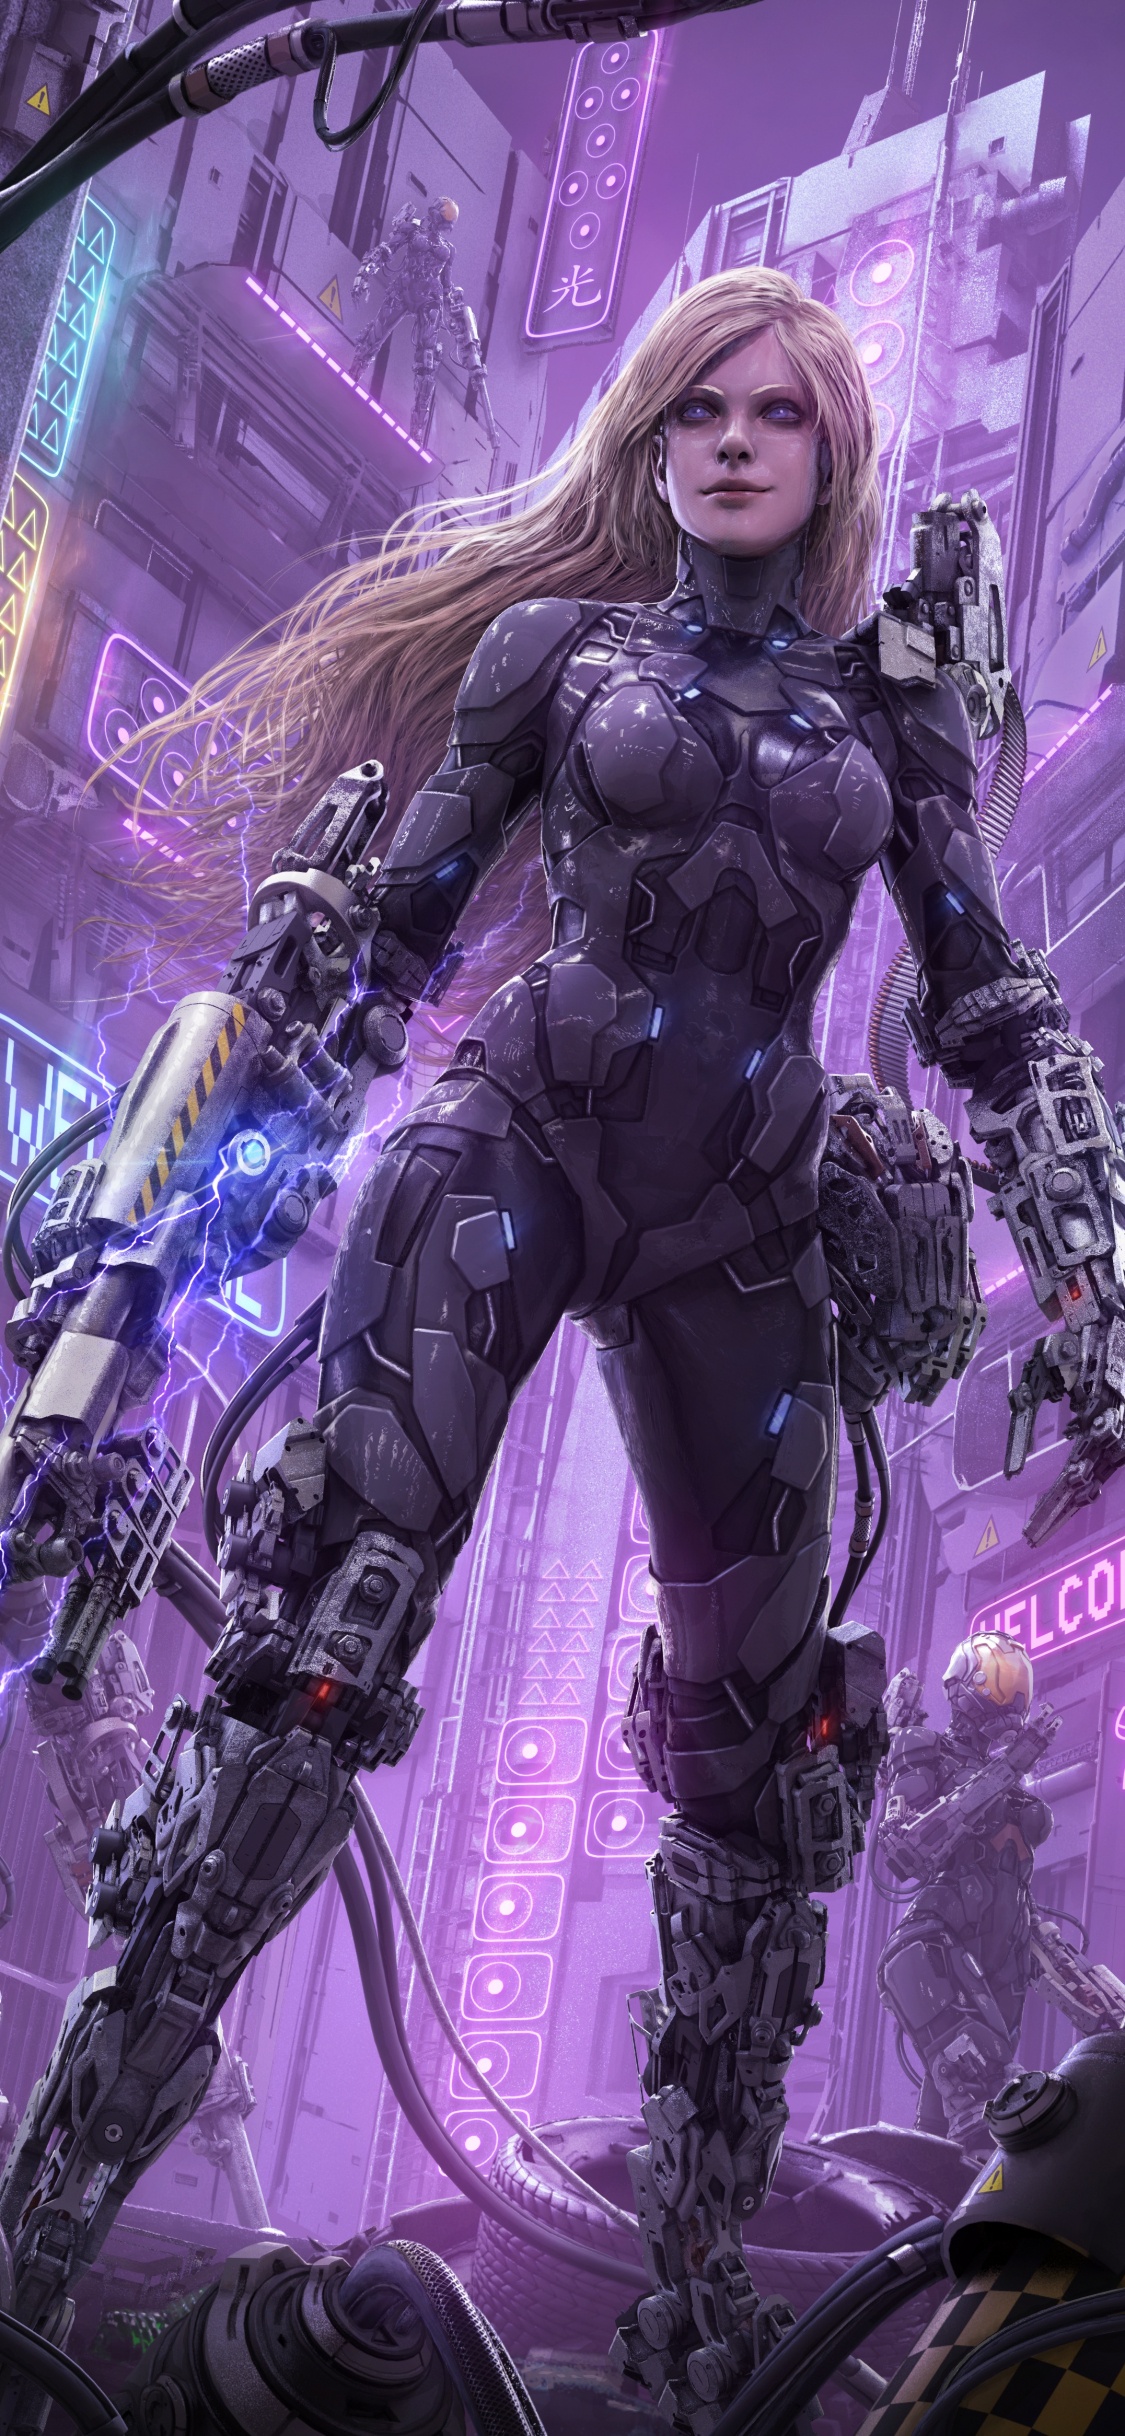 Cyberpunk, Science Fiction, Purple, pc Game, Games. Wallpaper in 1125x2436 Resolution